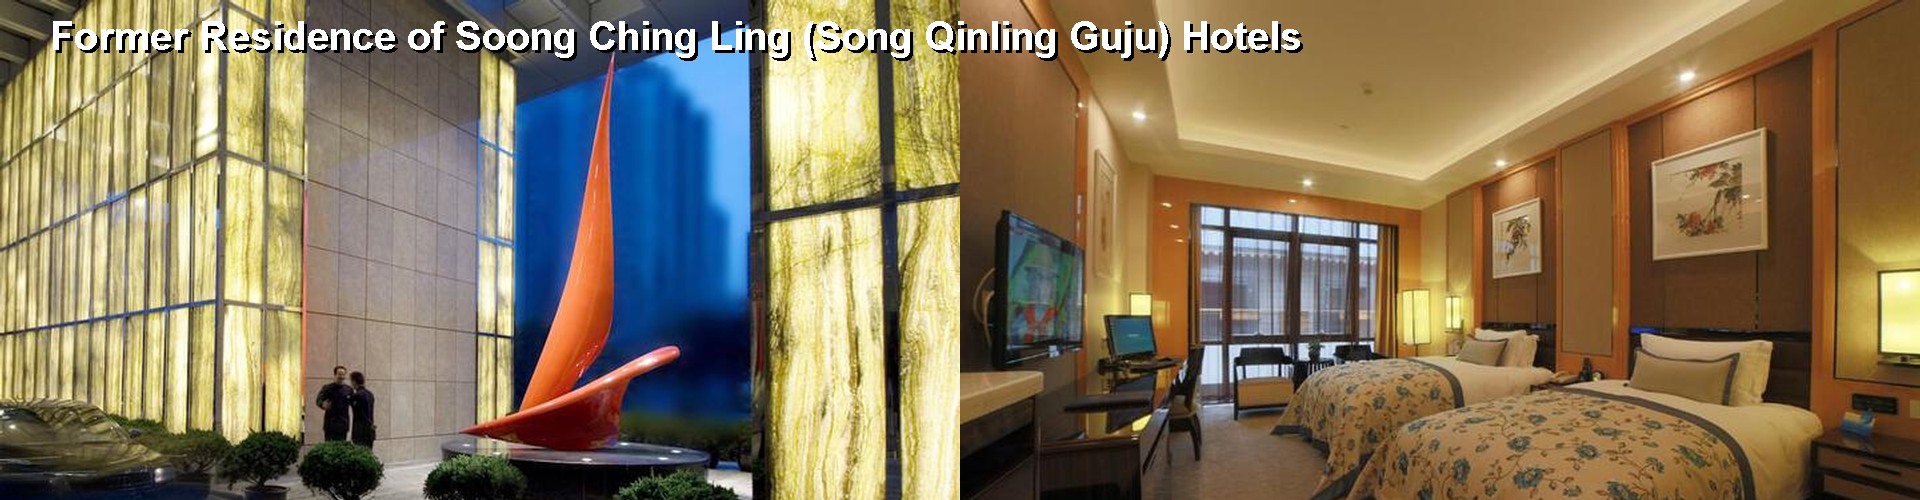 5 Best Hotels near Former Residence of Soong Ching Ling (Song Qinling Guju)